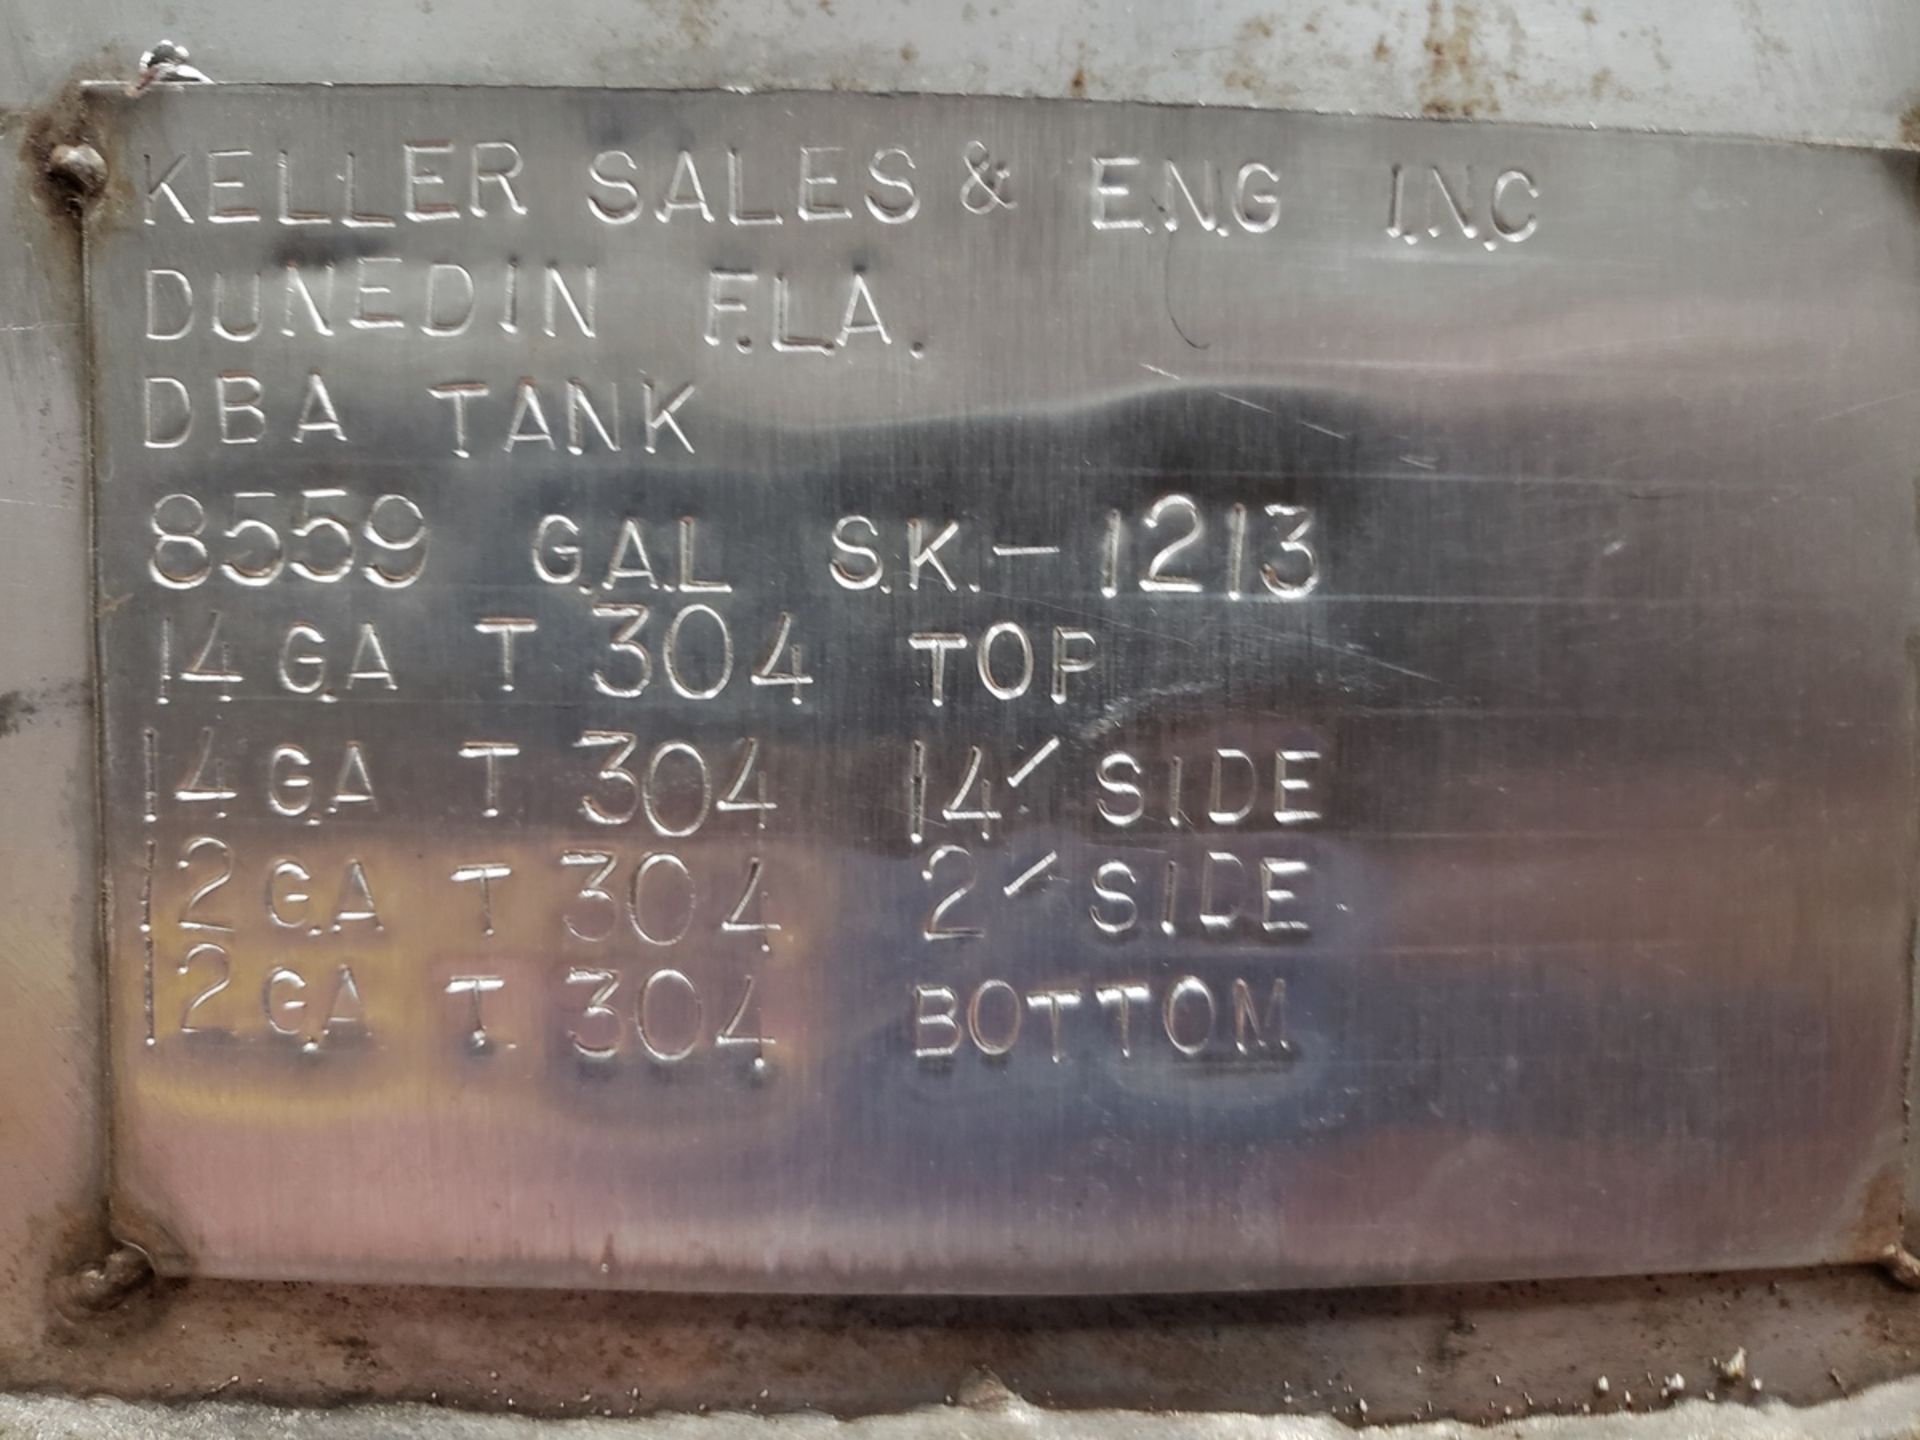 Keller Stainless Steel 8,500 Gallon Storage Tank, 9'6" Dia., 17'8" O.A.H., (Ref. ST- | Rig Fee $3500 - Image 3 of 5